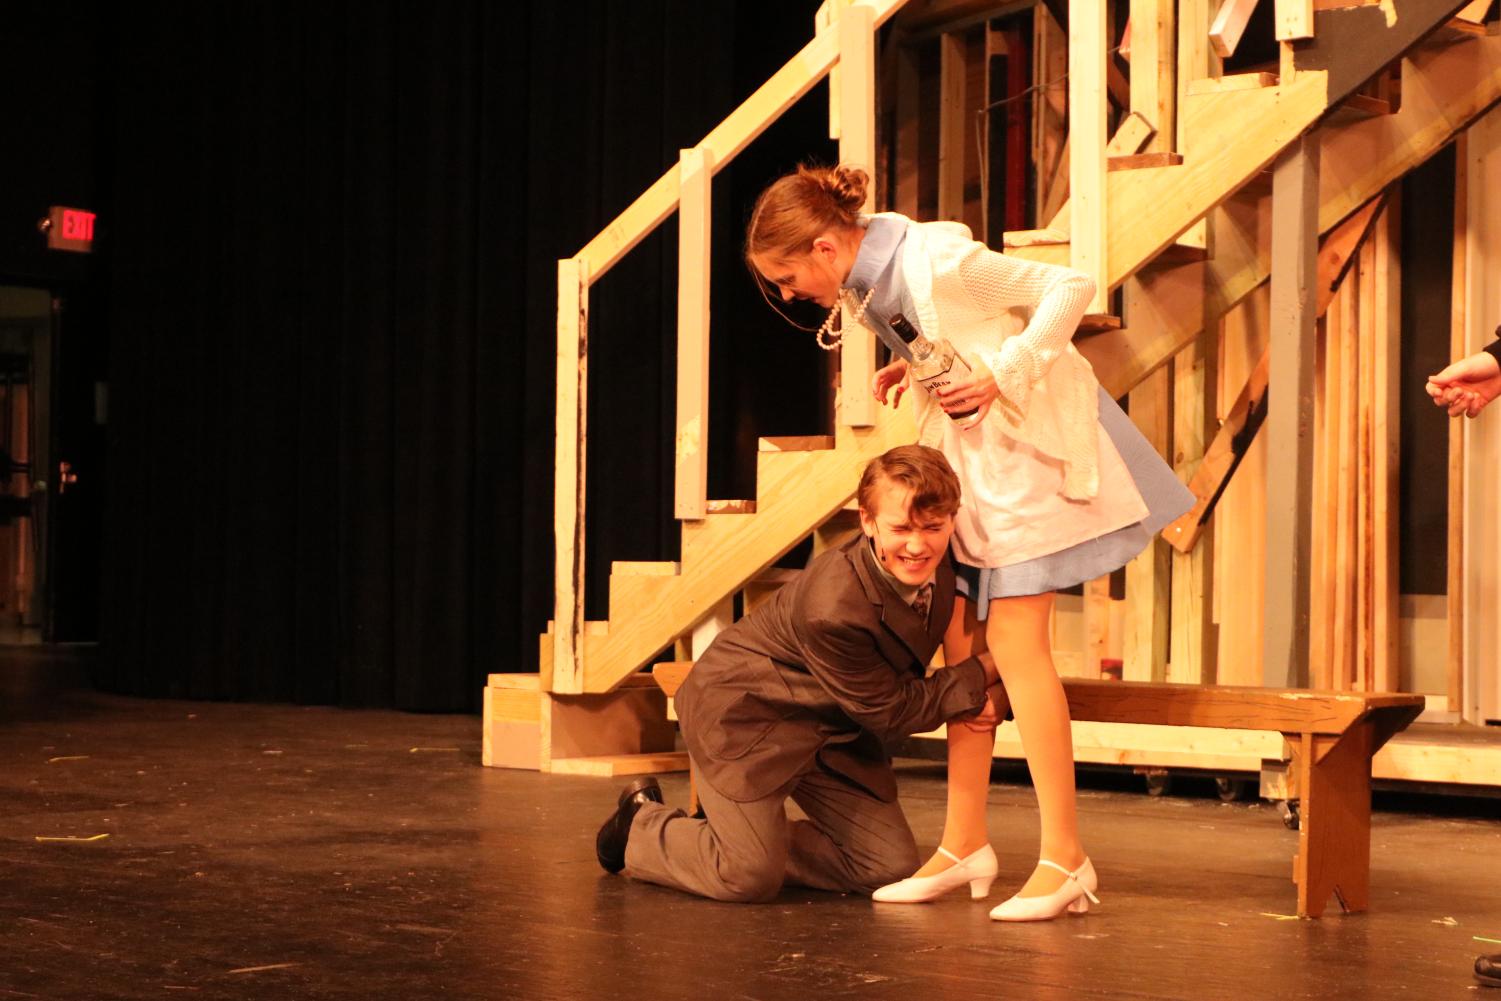 While begging Dotty Otley (freshman Mary Donavan) to take him
back, Garry Lejeune (freshman Jackson Schertzer) grabs on to her leg. The Falcon Players performed their fall play Noises Off from Dec. 1-3.